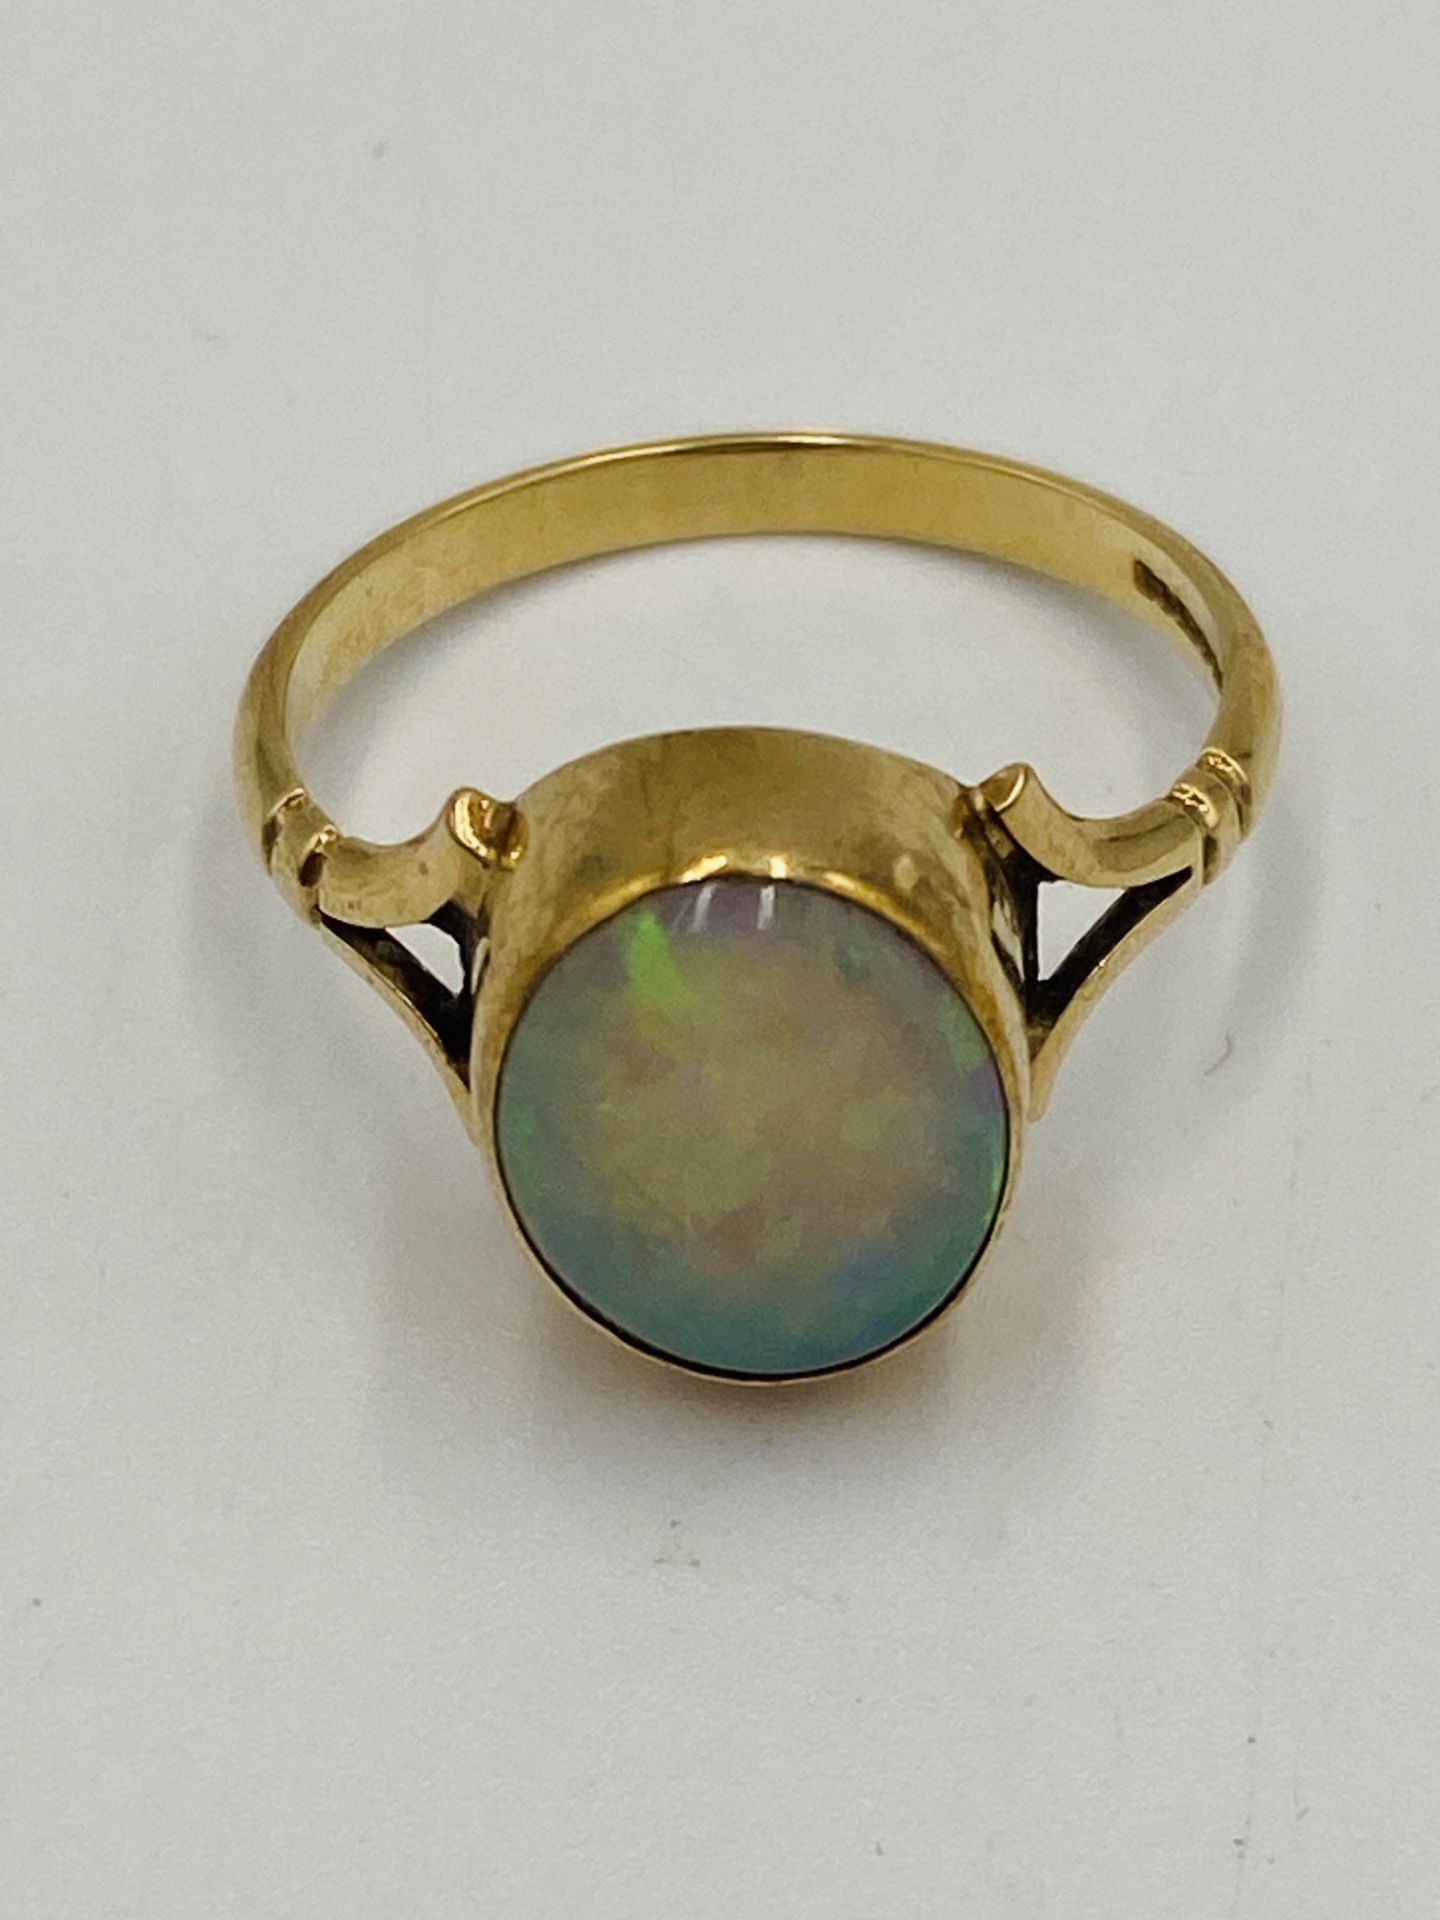 9ct gold ring set with a pale opal - Image 5 of 6